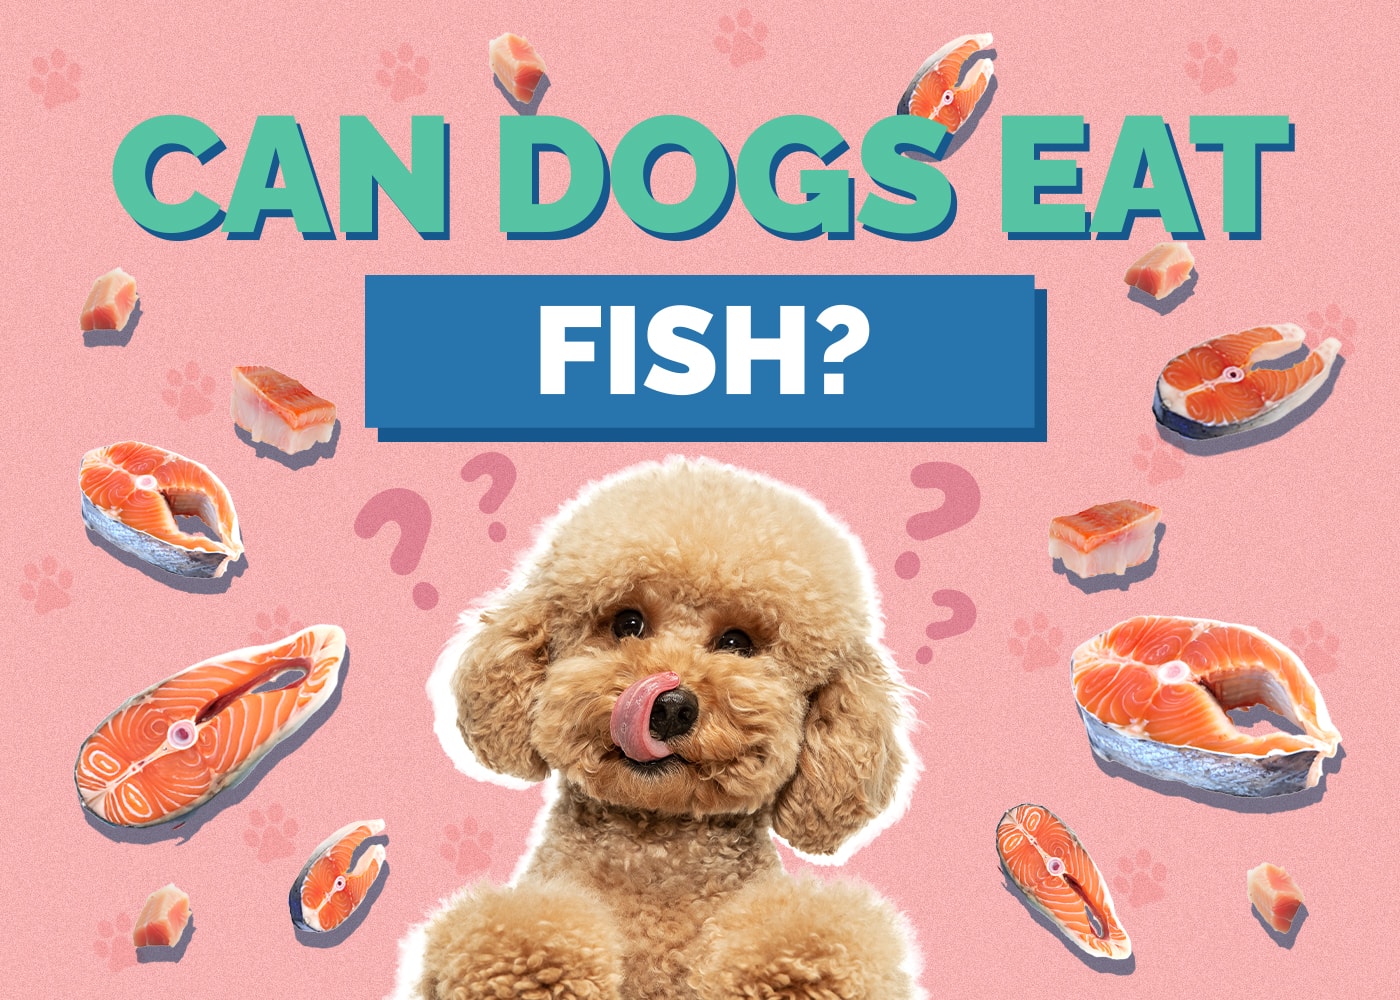 Can Dogs Eat fish